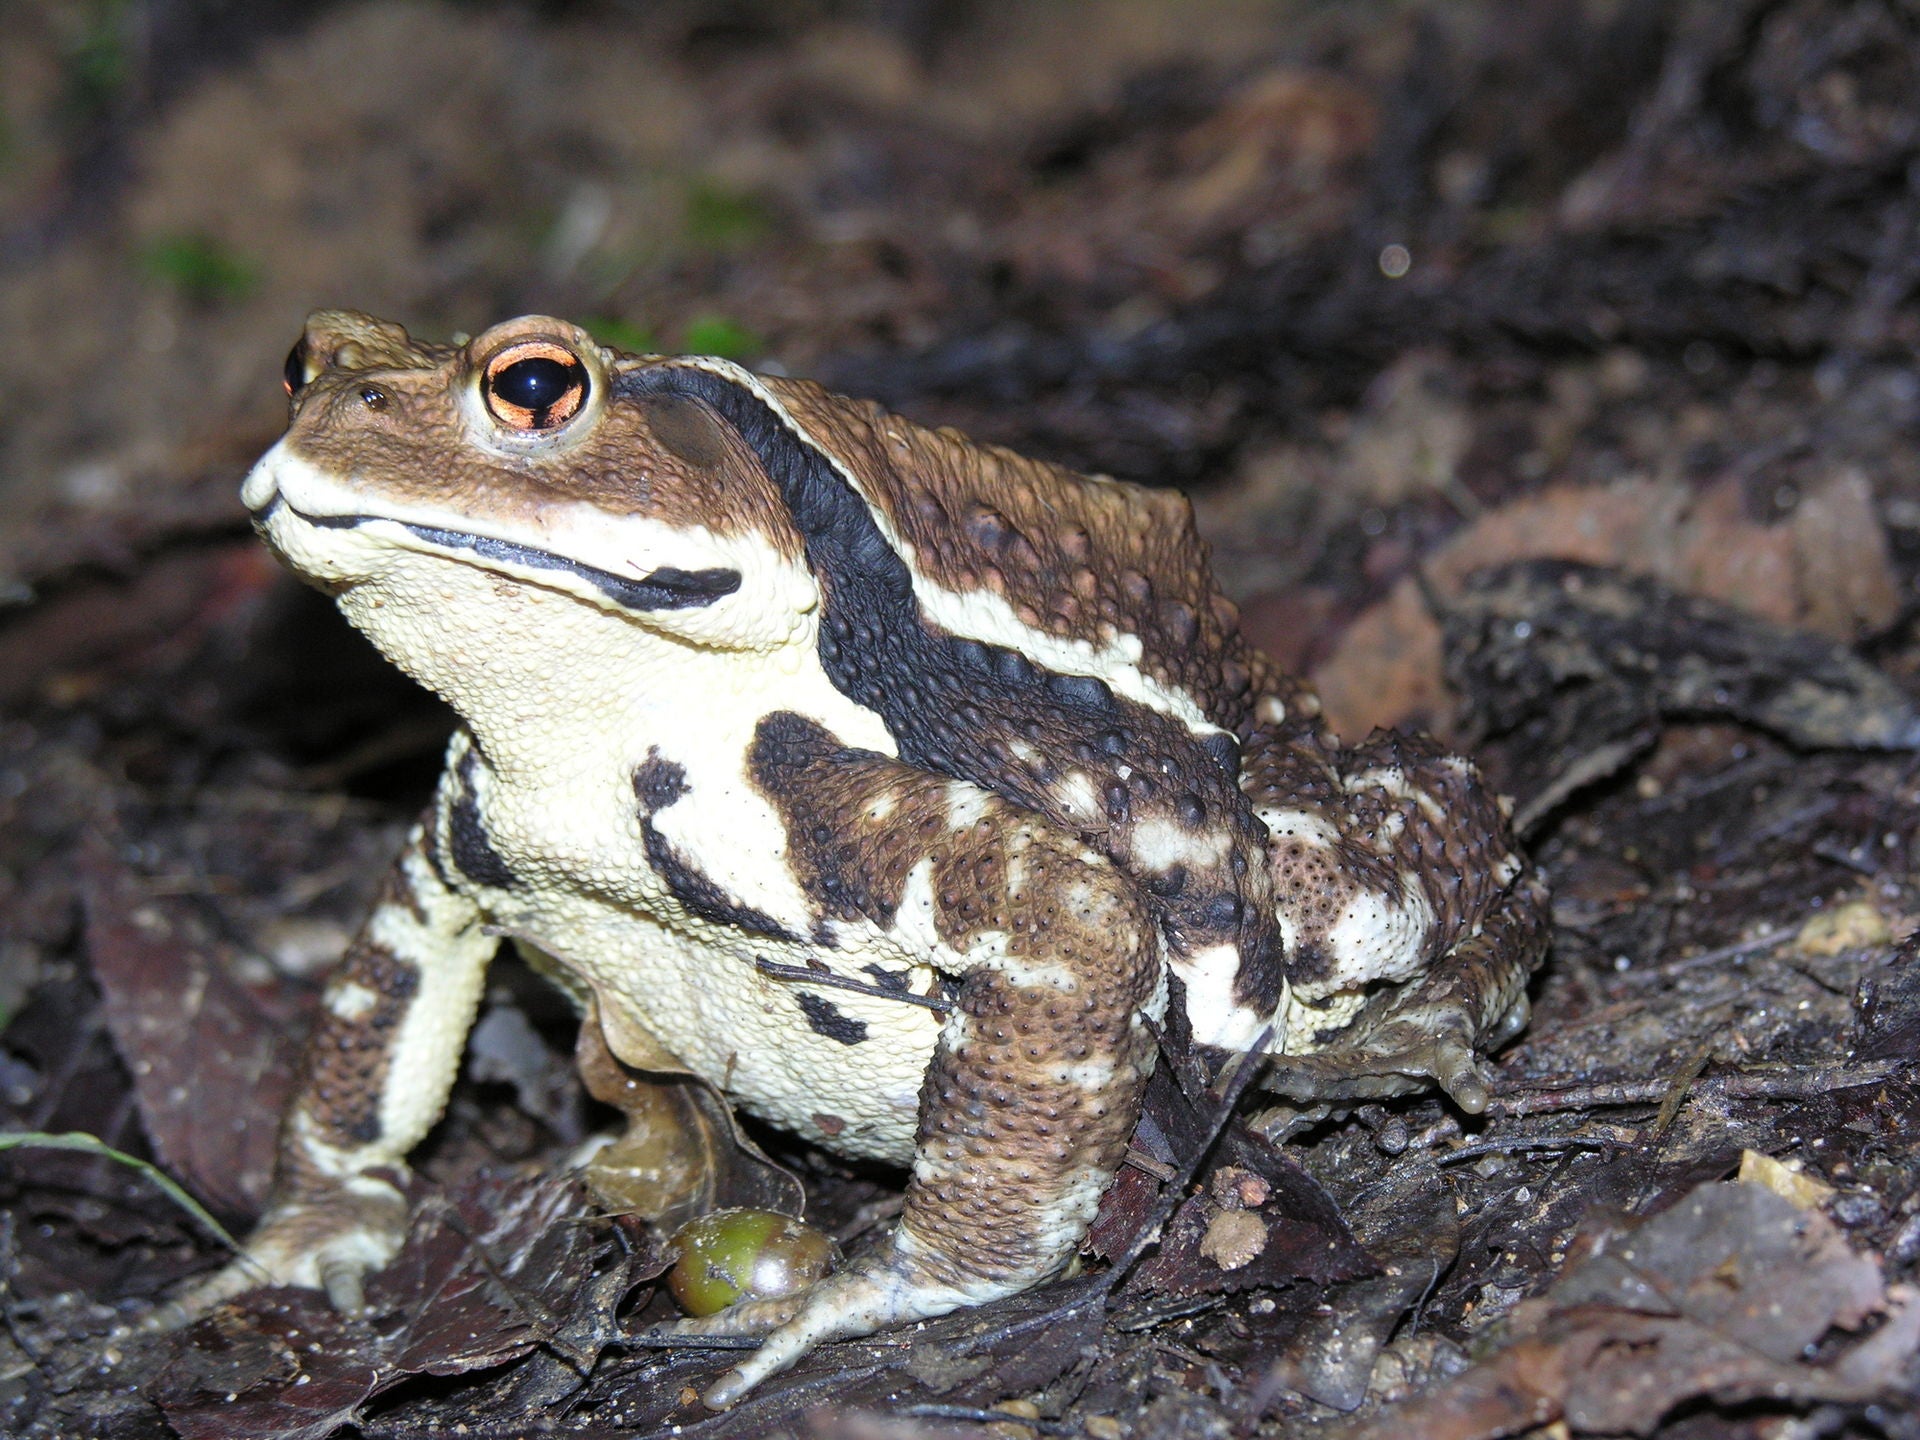 &#13;
Japanese common toad: some species are better at digesting ‘the farting bug’ than others &#13;